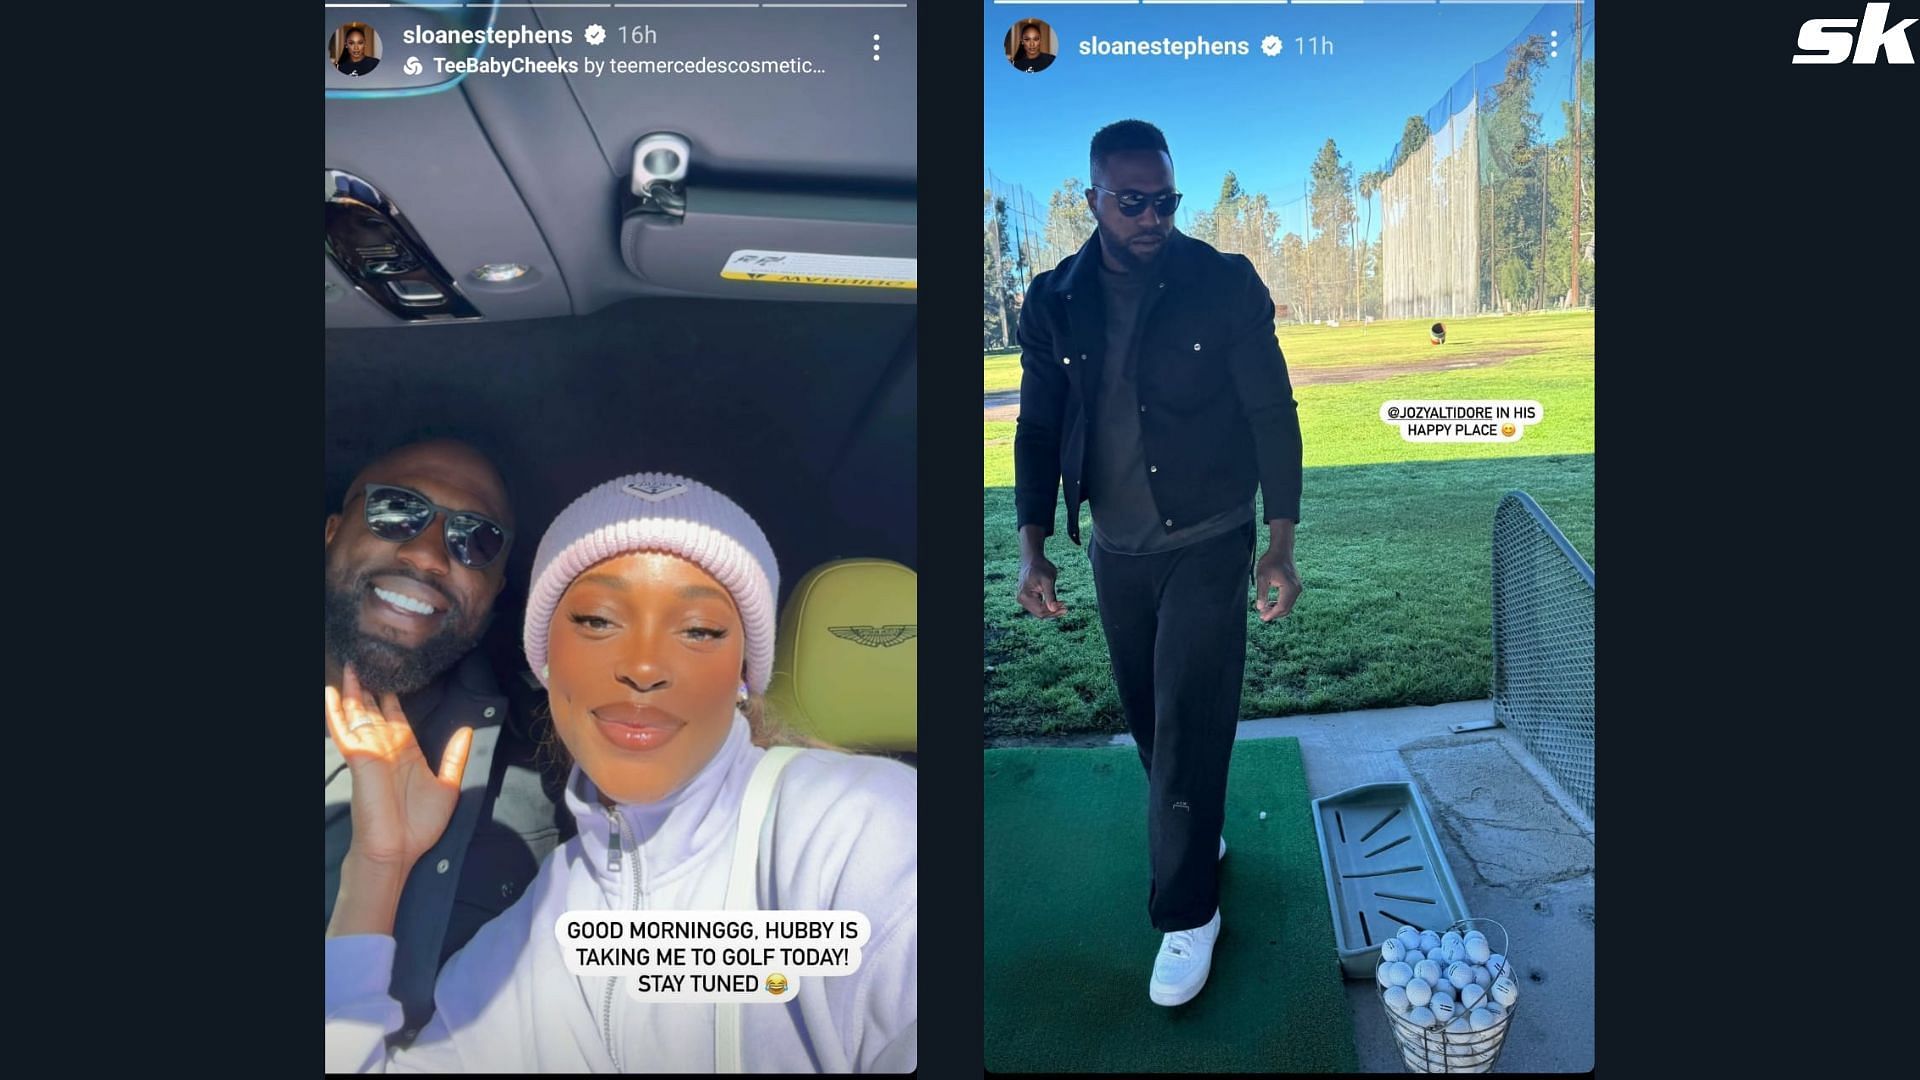 Sloane Stephens and husband Jozy Altidore enjoy a day out at the golf course.